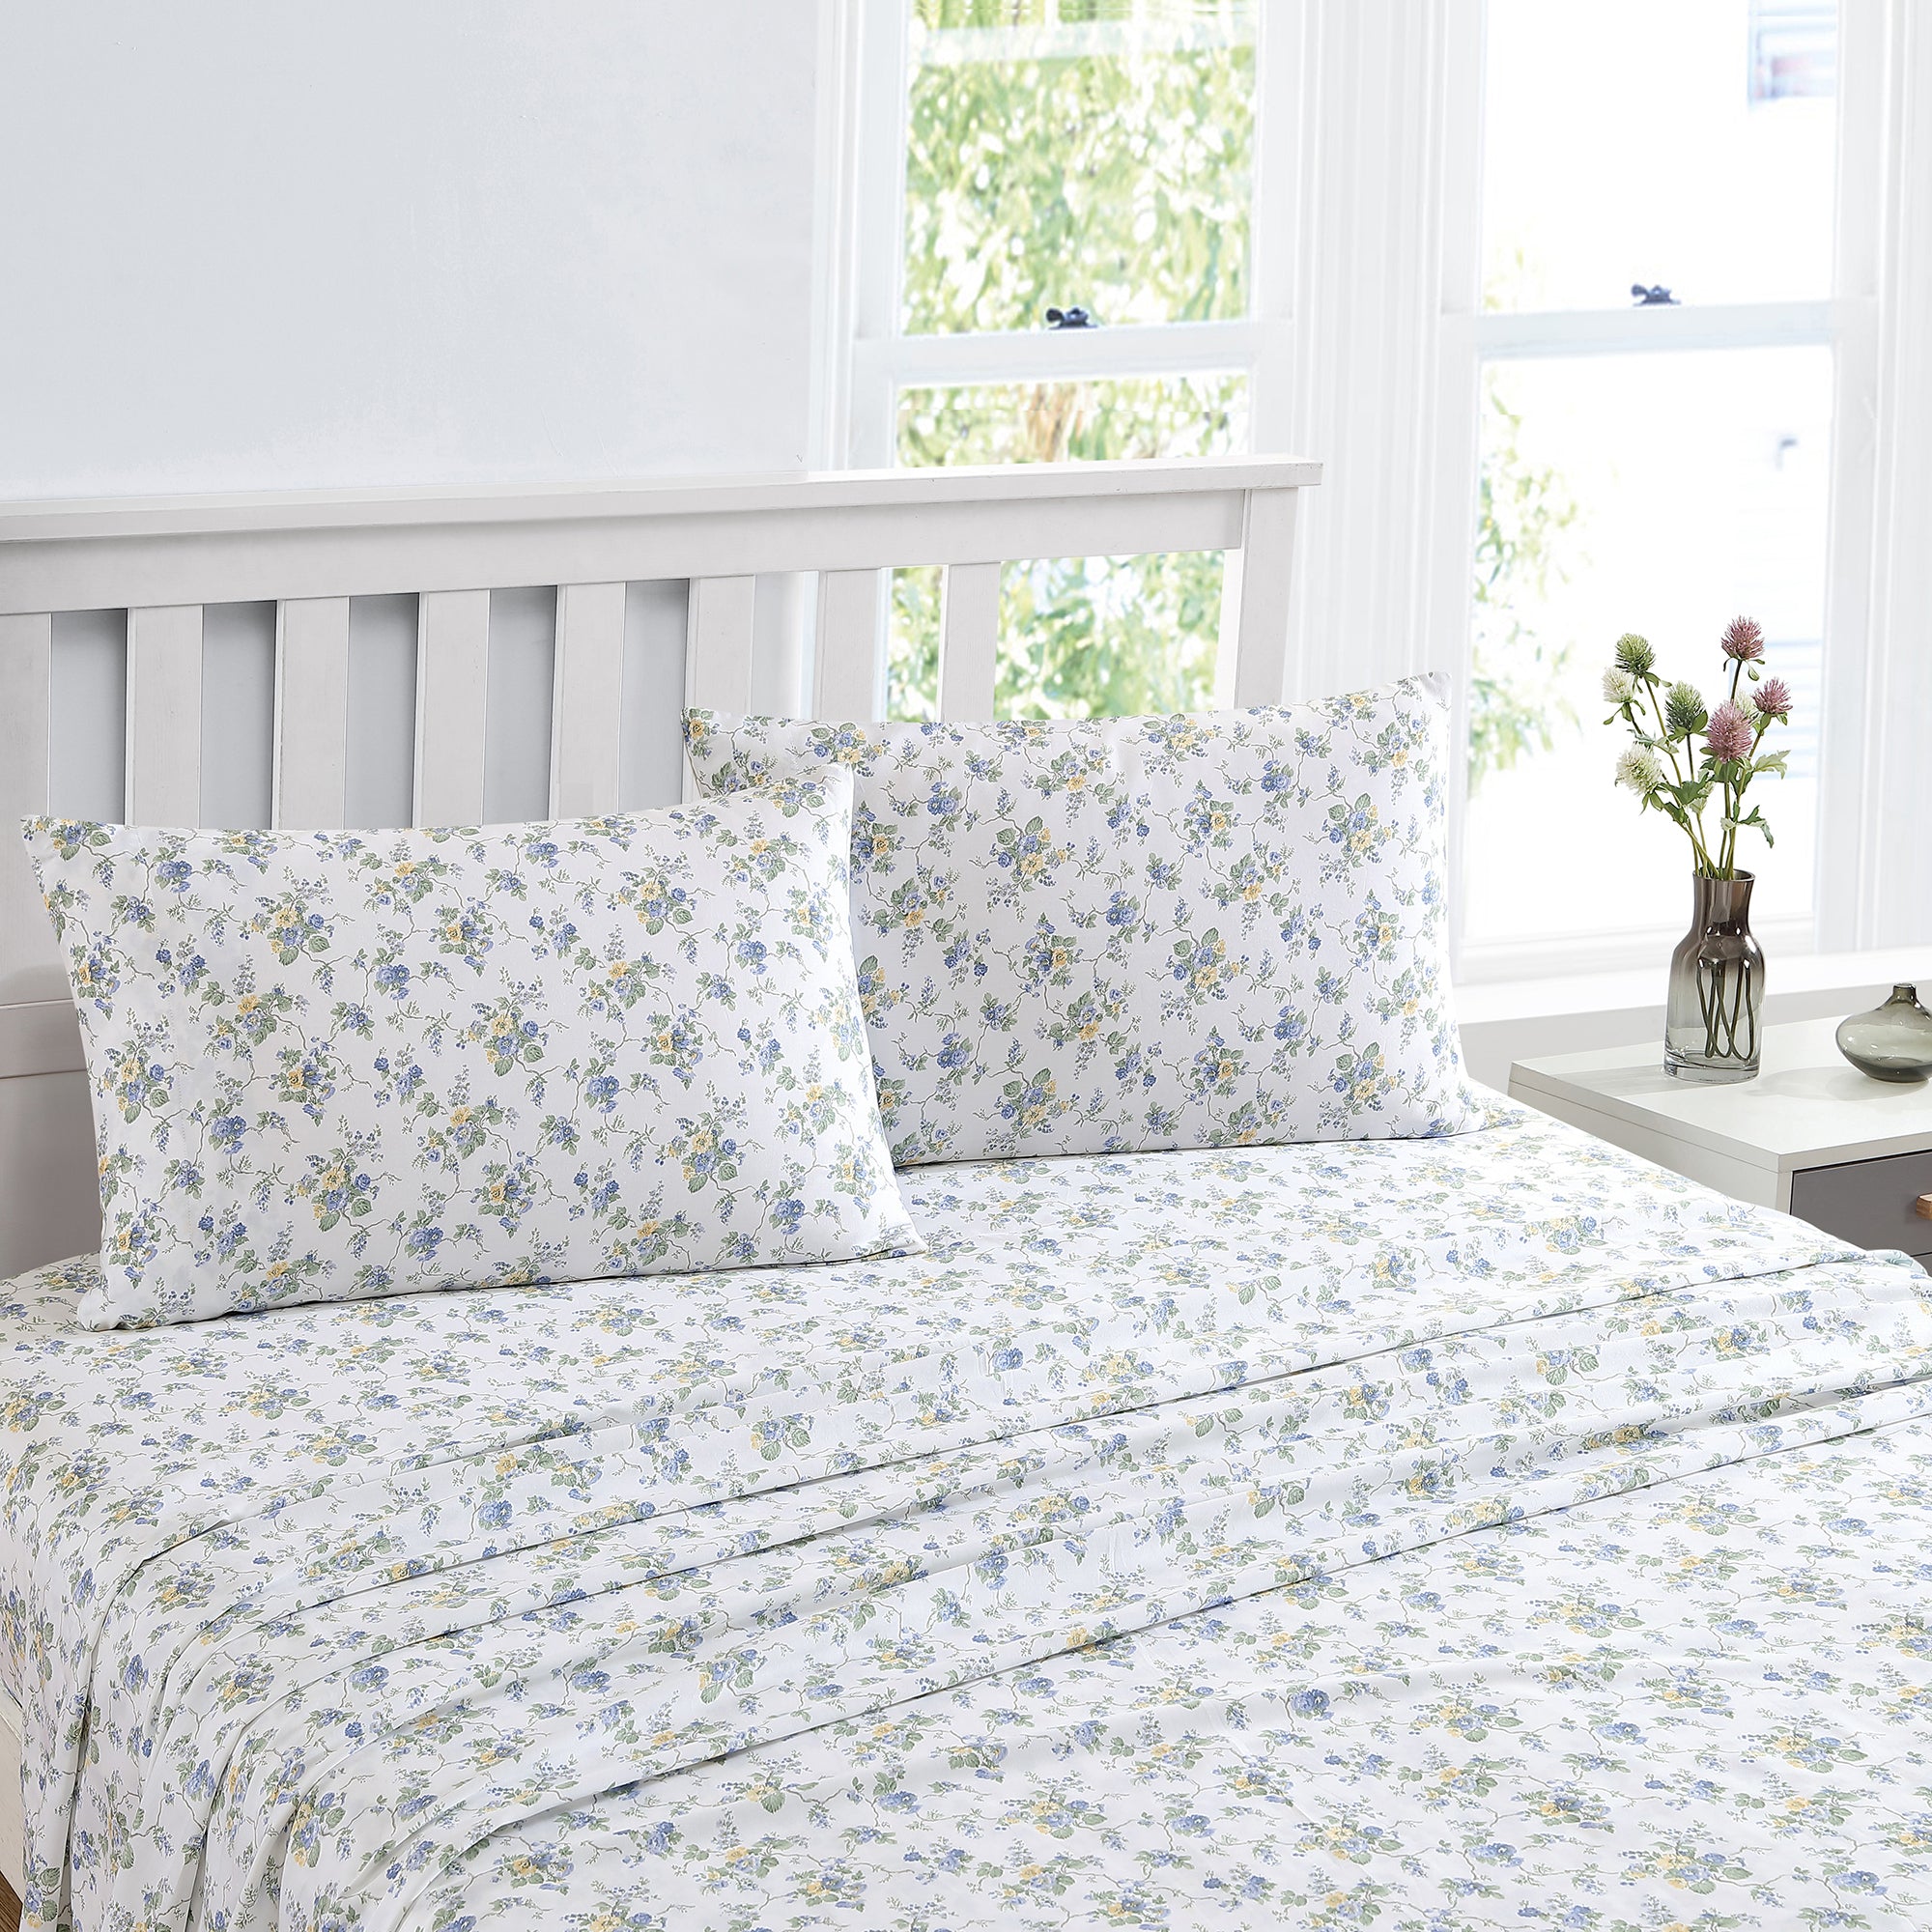 The Le Fleur 375THC Cotton Sheet Set by Laura Ashley offers a luxurious look for your bedroom. Crafted with 100% cotton sateen and a 375 thread count, you can enjoy the softness of its petite floral print in a fresh palette of blue and yellow on white ground with sage accents. Add a contemporary floral vibe to your interior with this stylish sheet set.